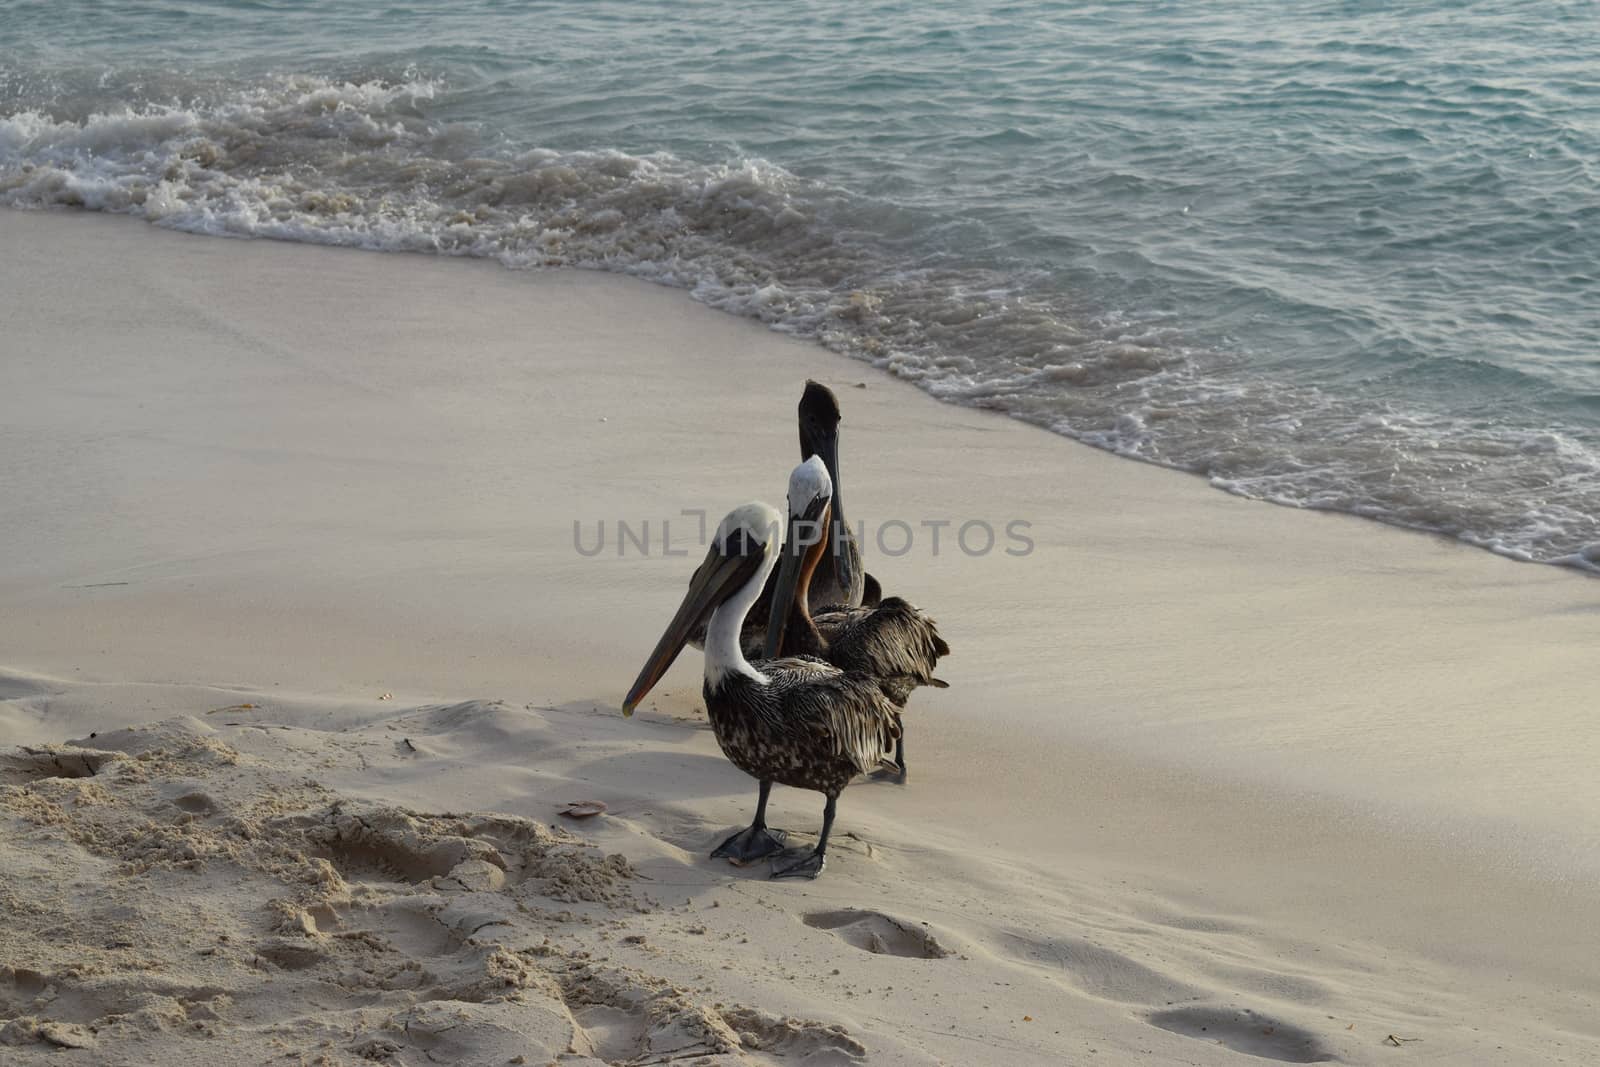 Seagulls are waiting on the beach to receive fishes from a fisherman - Aruba Island, carribean island by matteobartolini